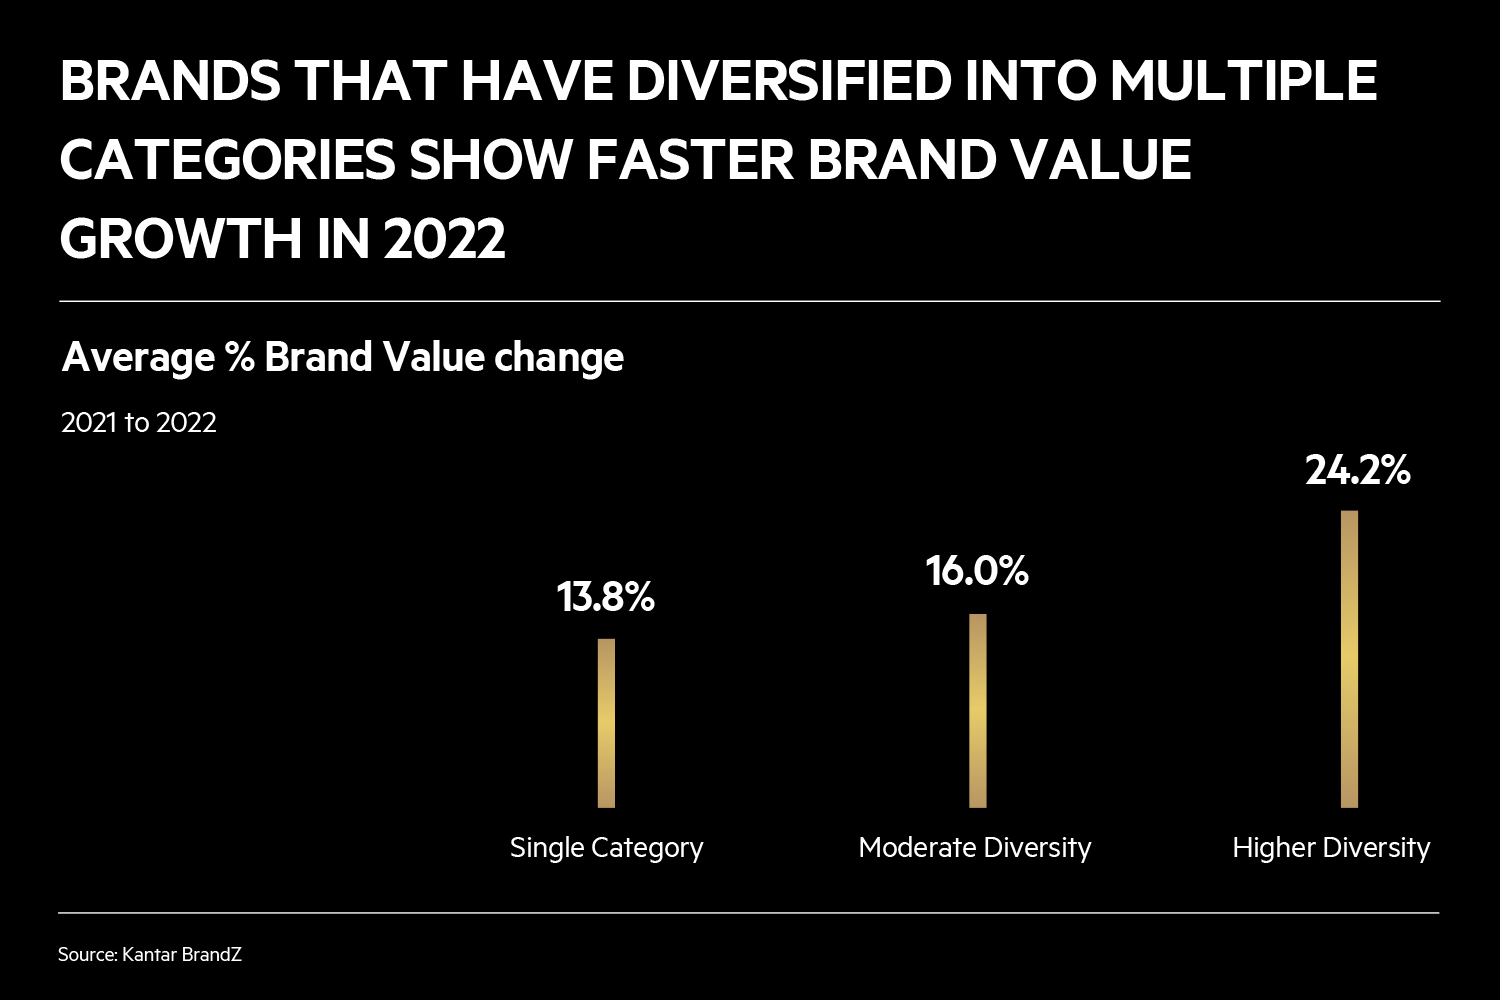 BRANDS THAT HAVE DIVERSIFIED INTO MULTIPLE CATEGORIES SHOW FASTER BRAND VALUE GROWTH IN 2022